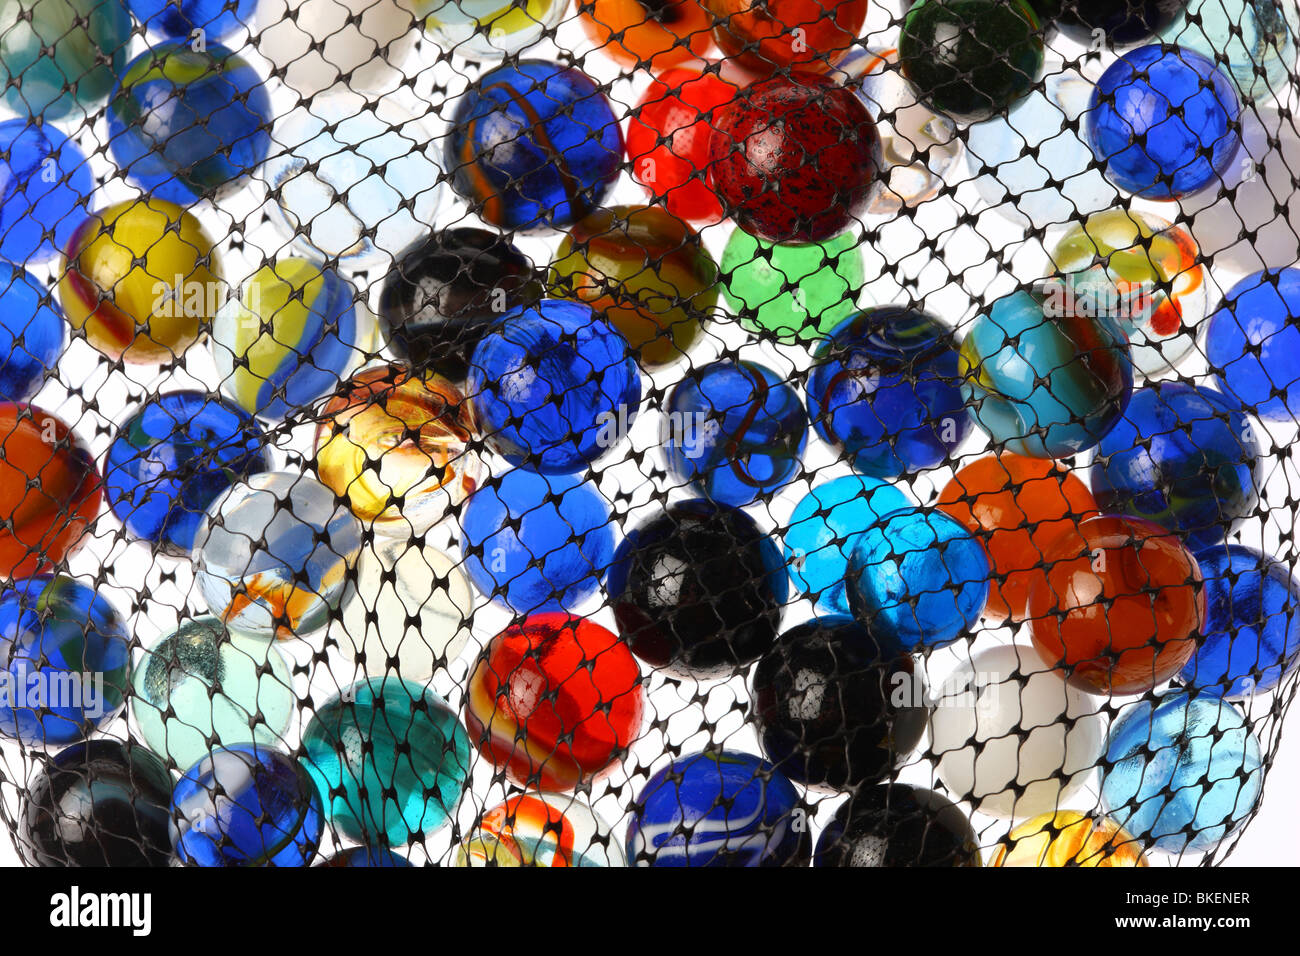 glass marbles, colorful Stock Photo